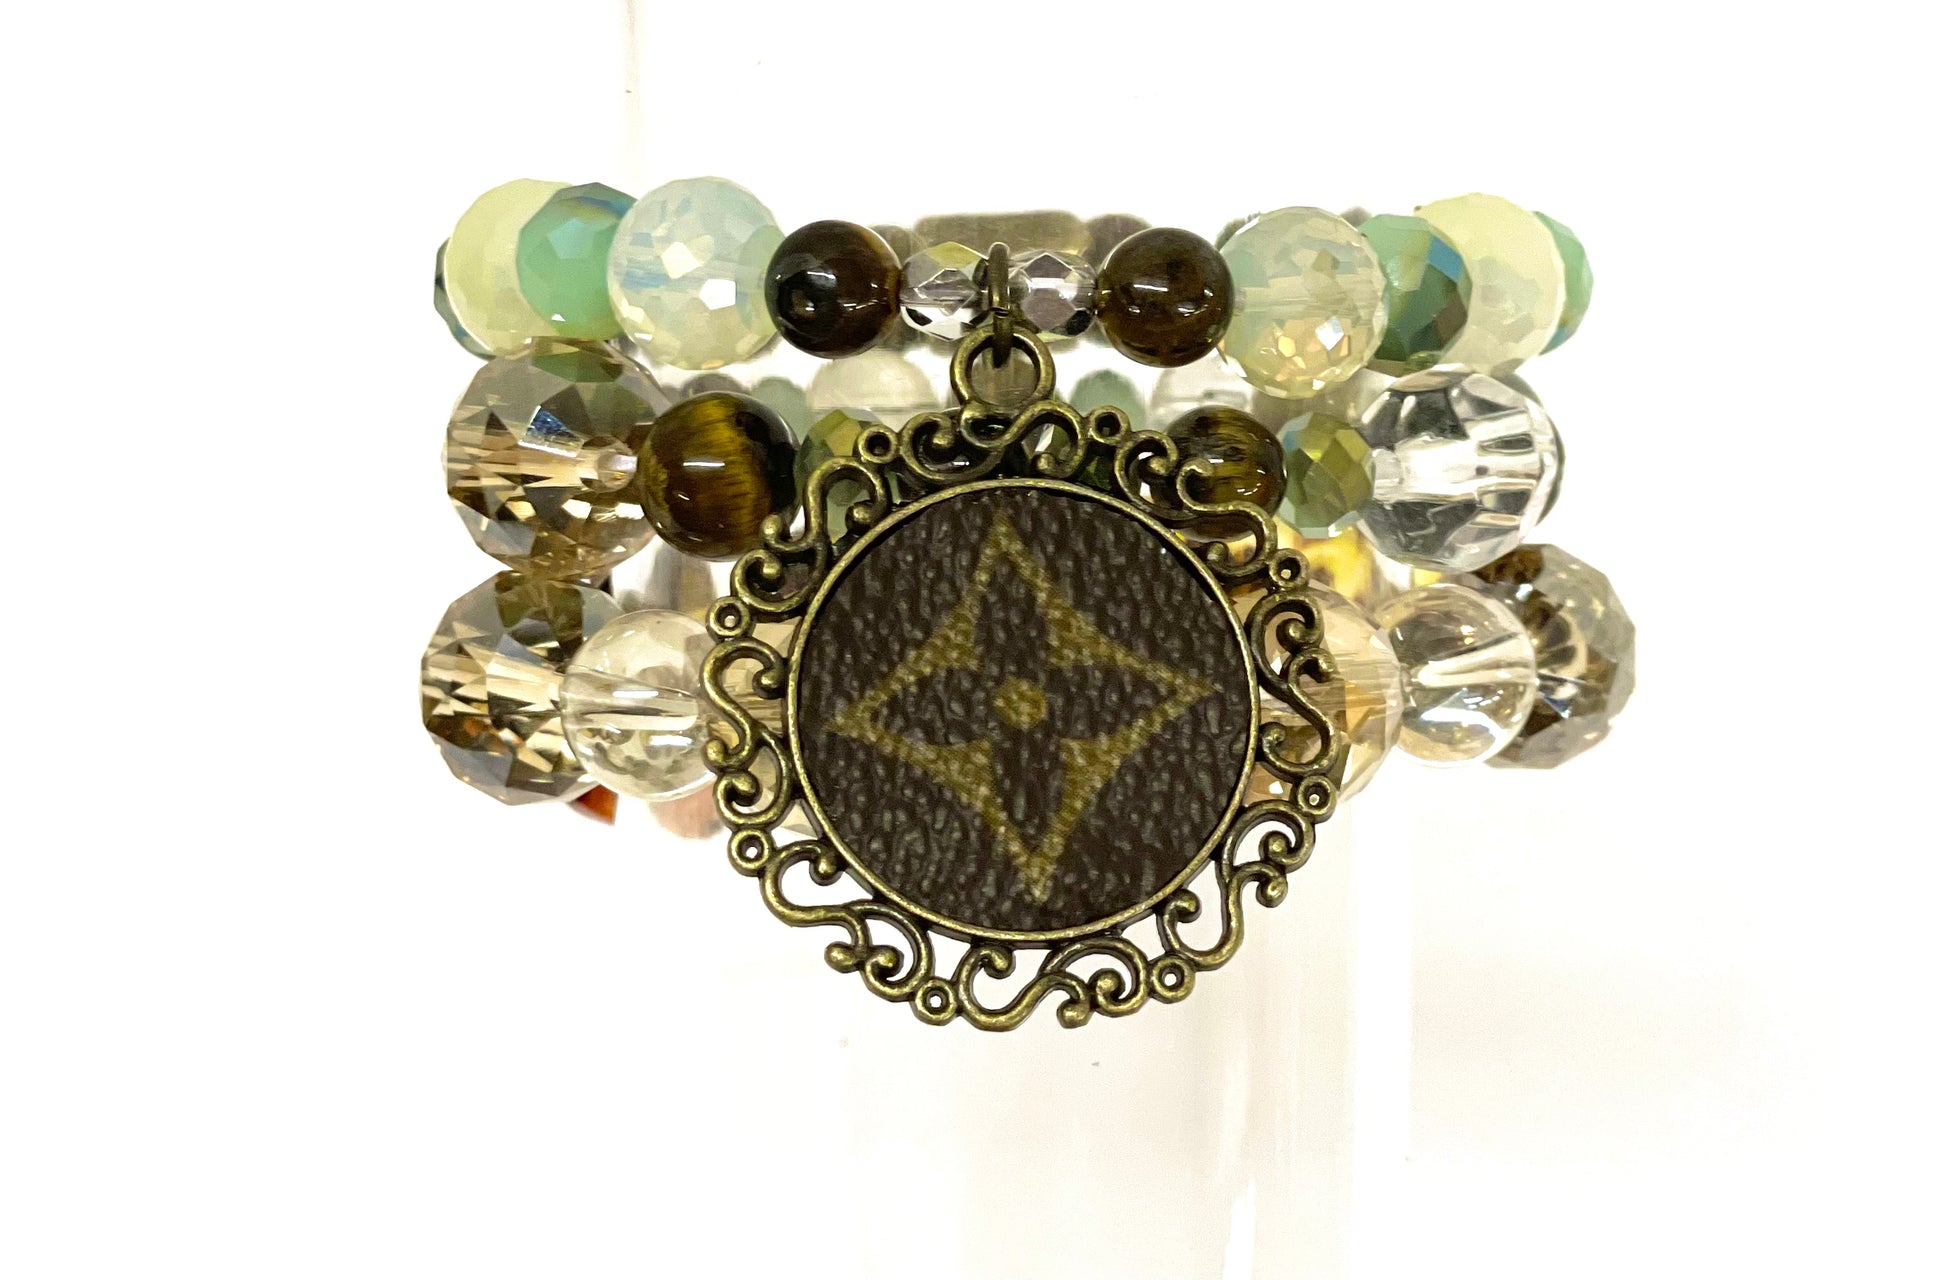 Hand beaded bracelet set “sea glass” with antique scroll pendant - Patches Of Upcycling